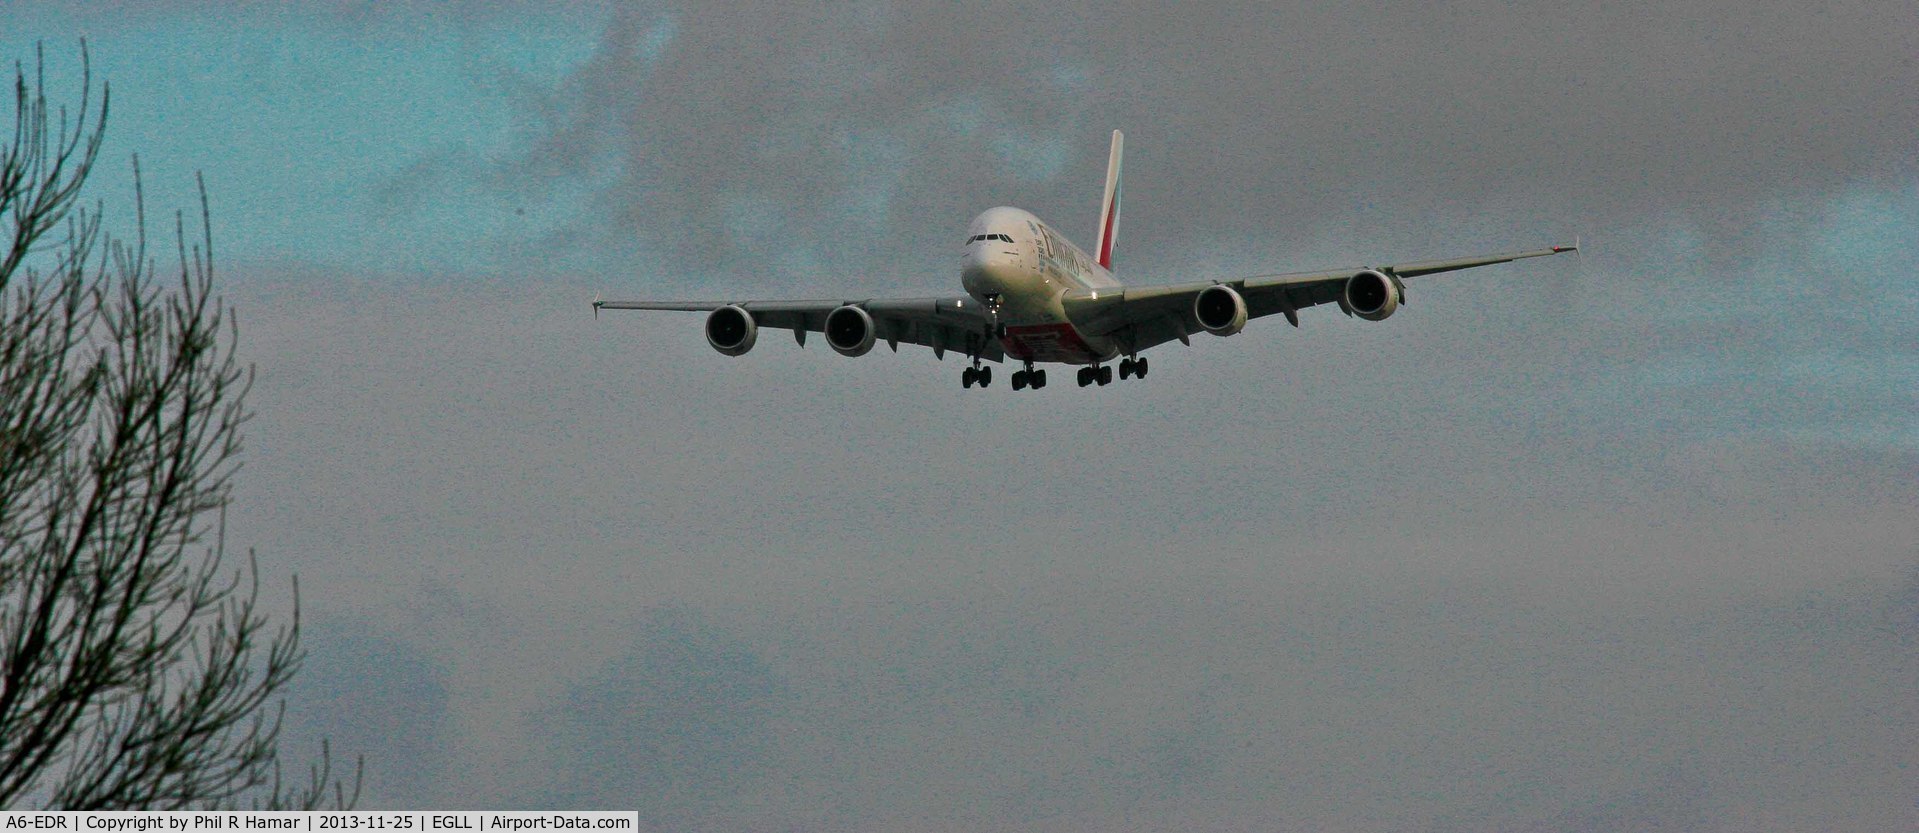 A6-EDR, 2011 Airbus A380-861 C/N 083, Emirates Airlines, (A6-EDR) 2011 Airbus A380-861, c/n 083, on approach to land on 27L Heathrow. © PhilRHama